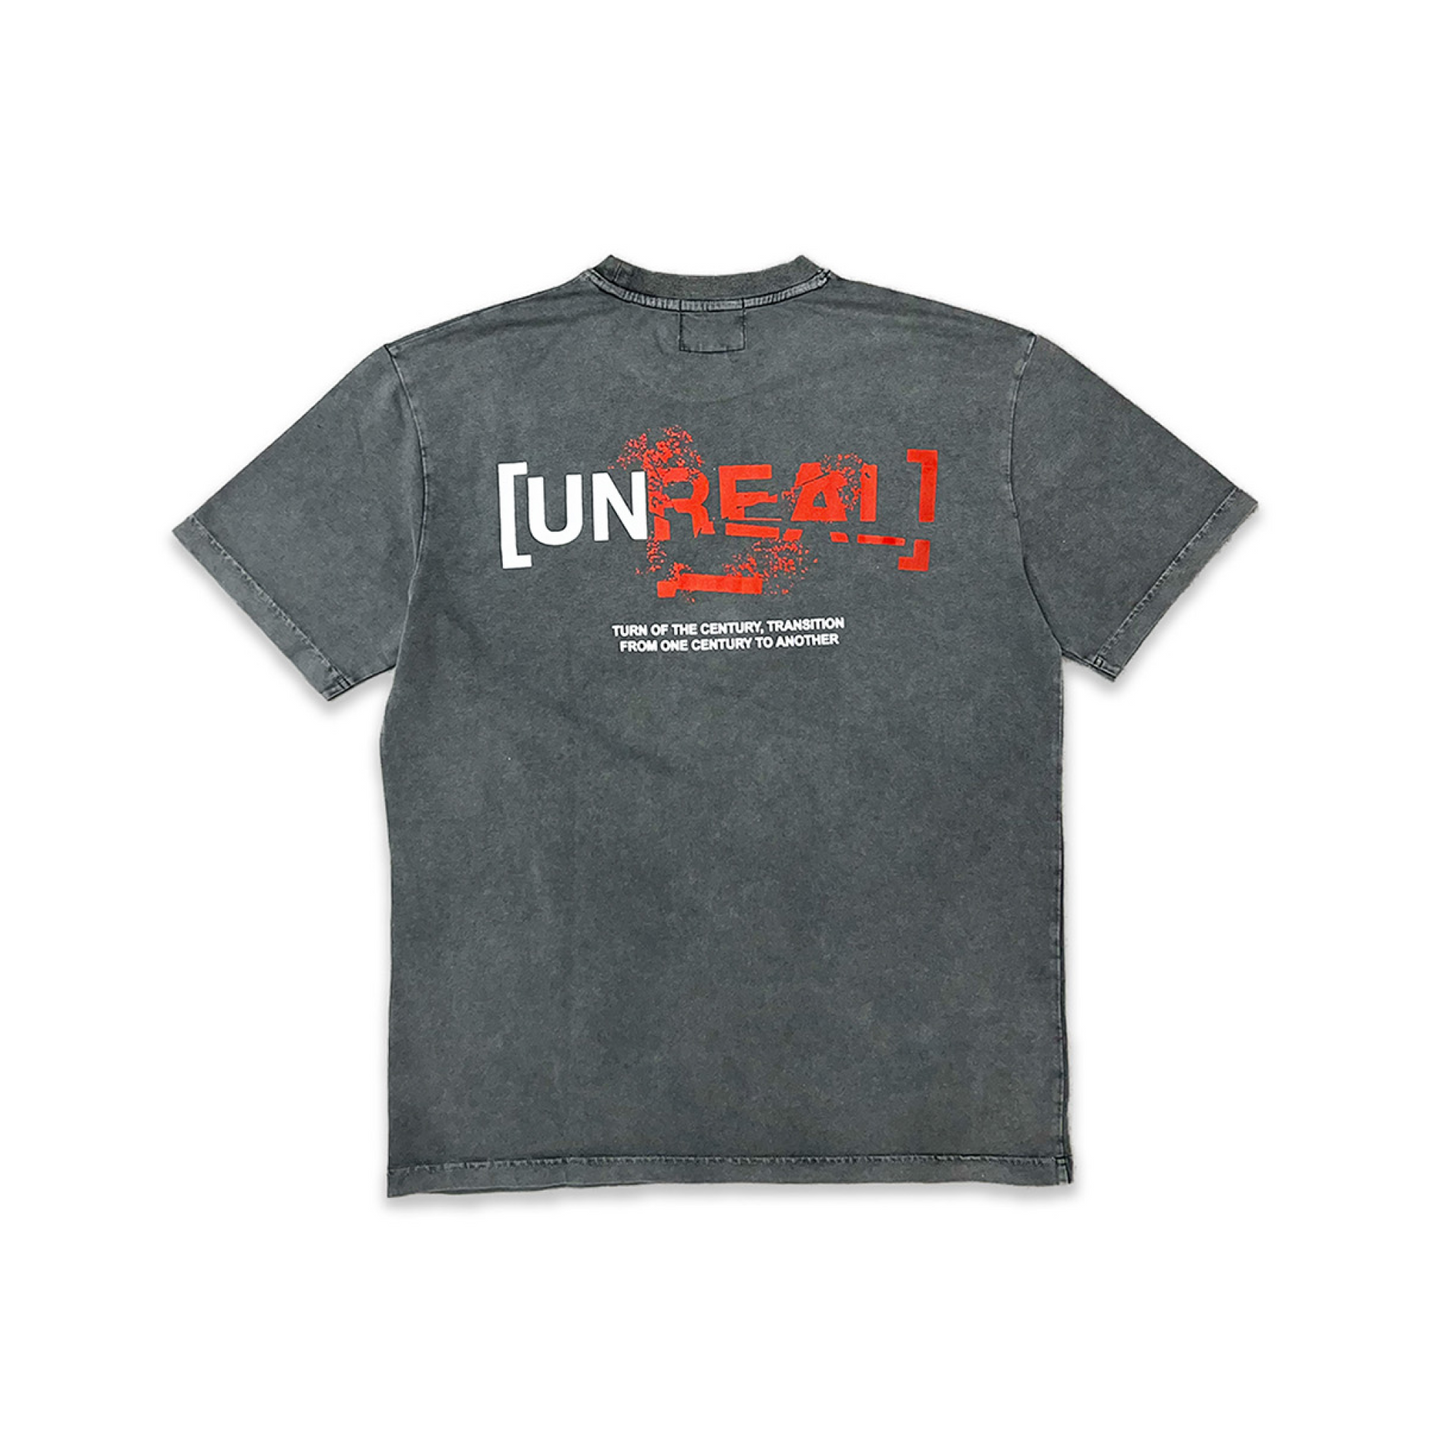 Unreal Washed Transition Tee Black